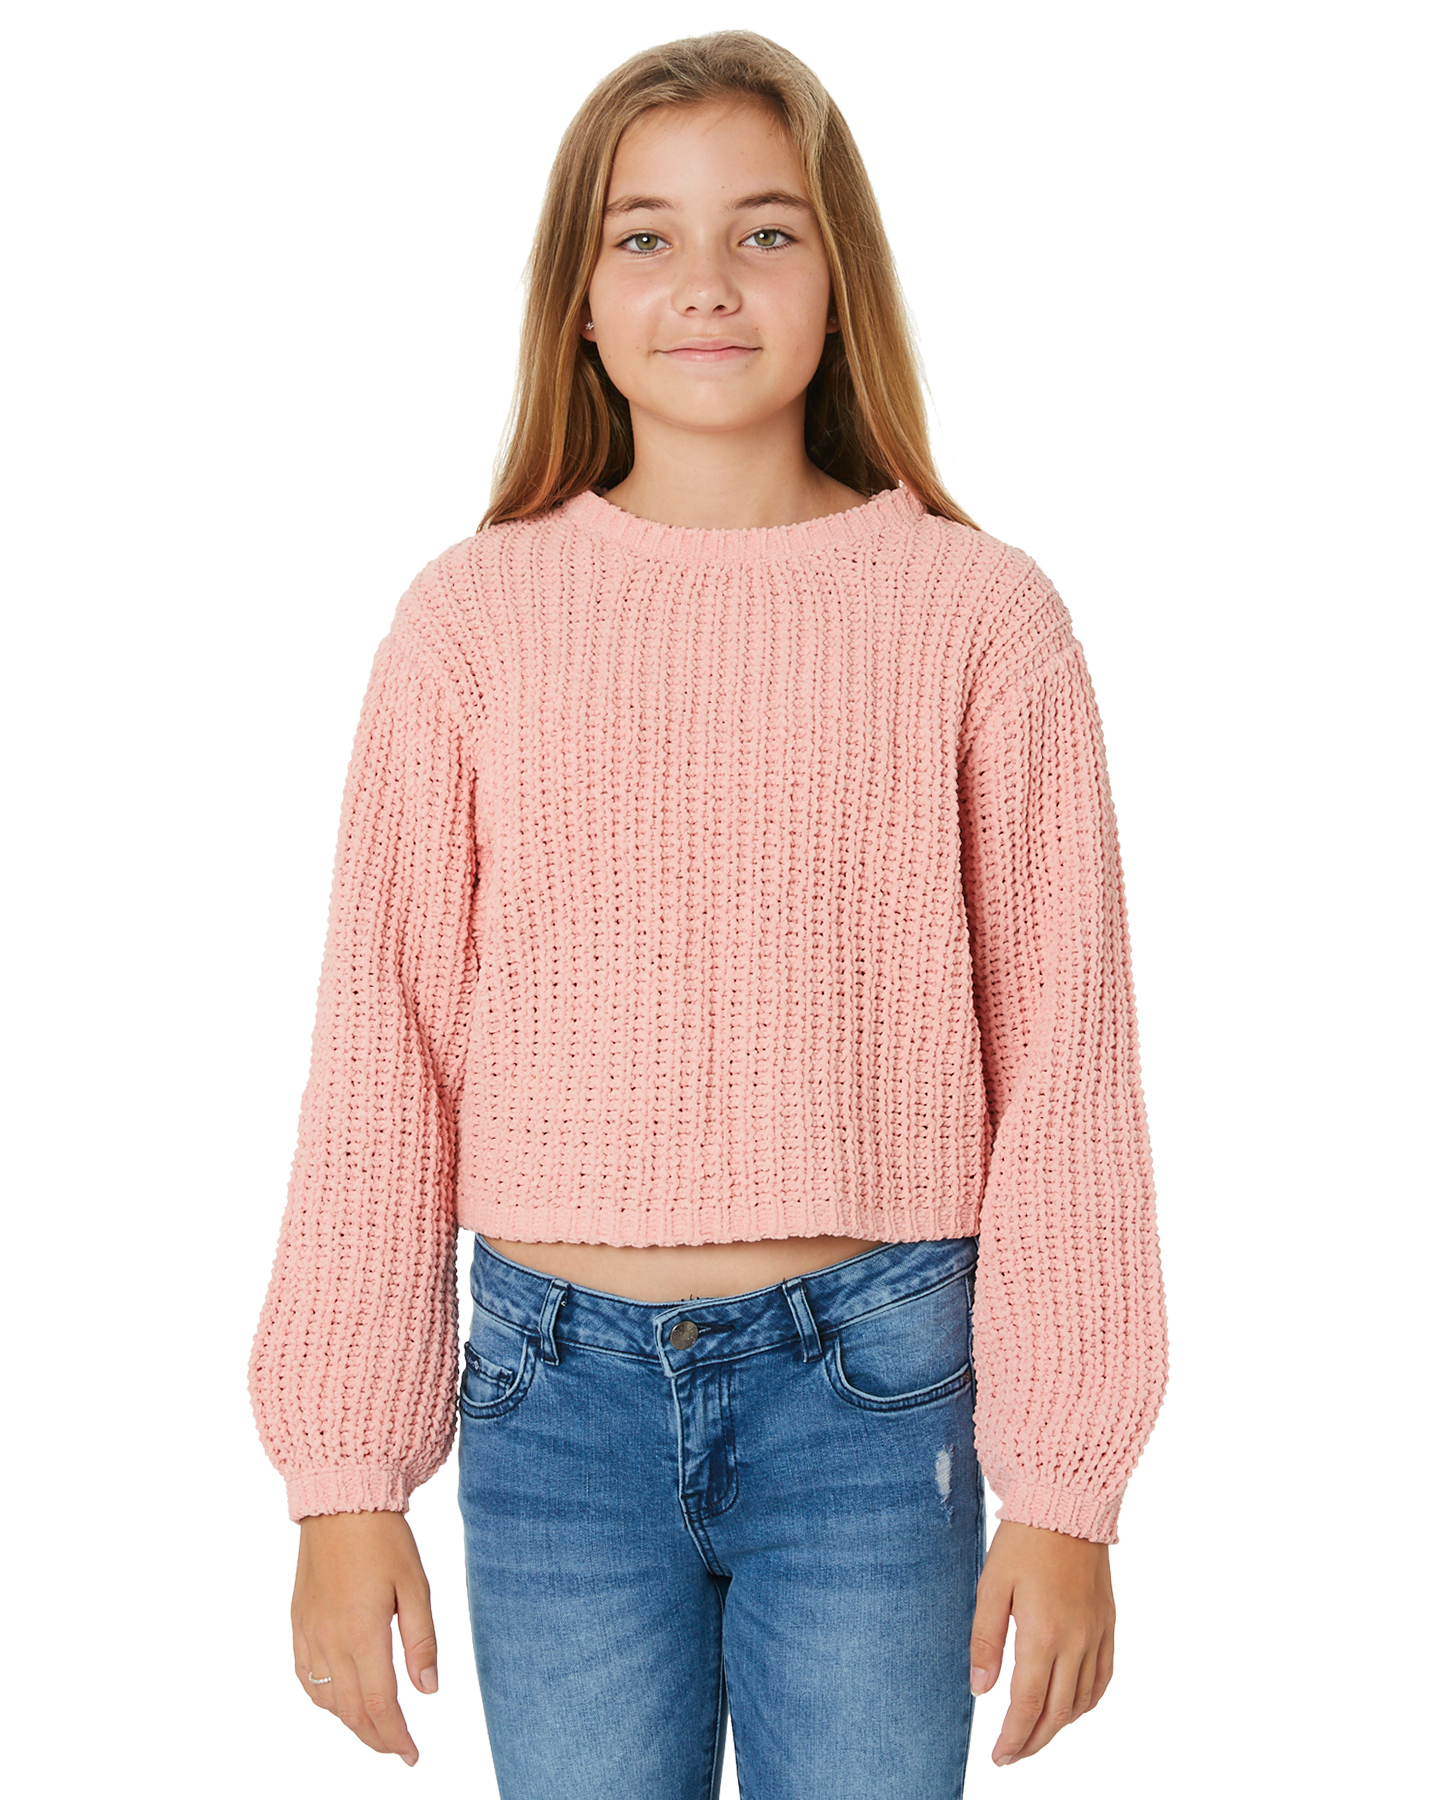 Eves Sister Girls Holiday Knit - Teens - Pink | SurfStitch